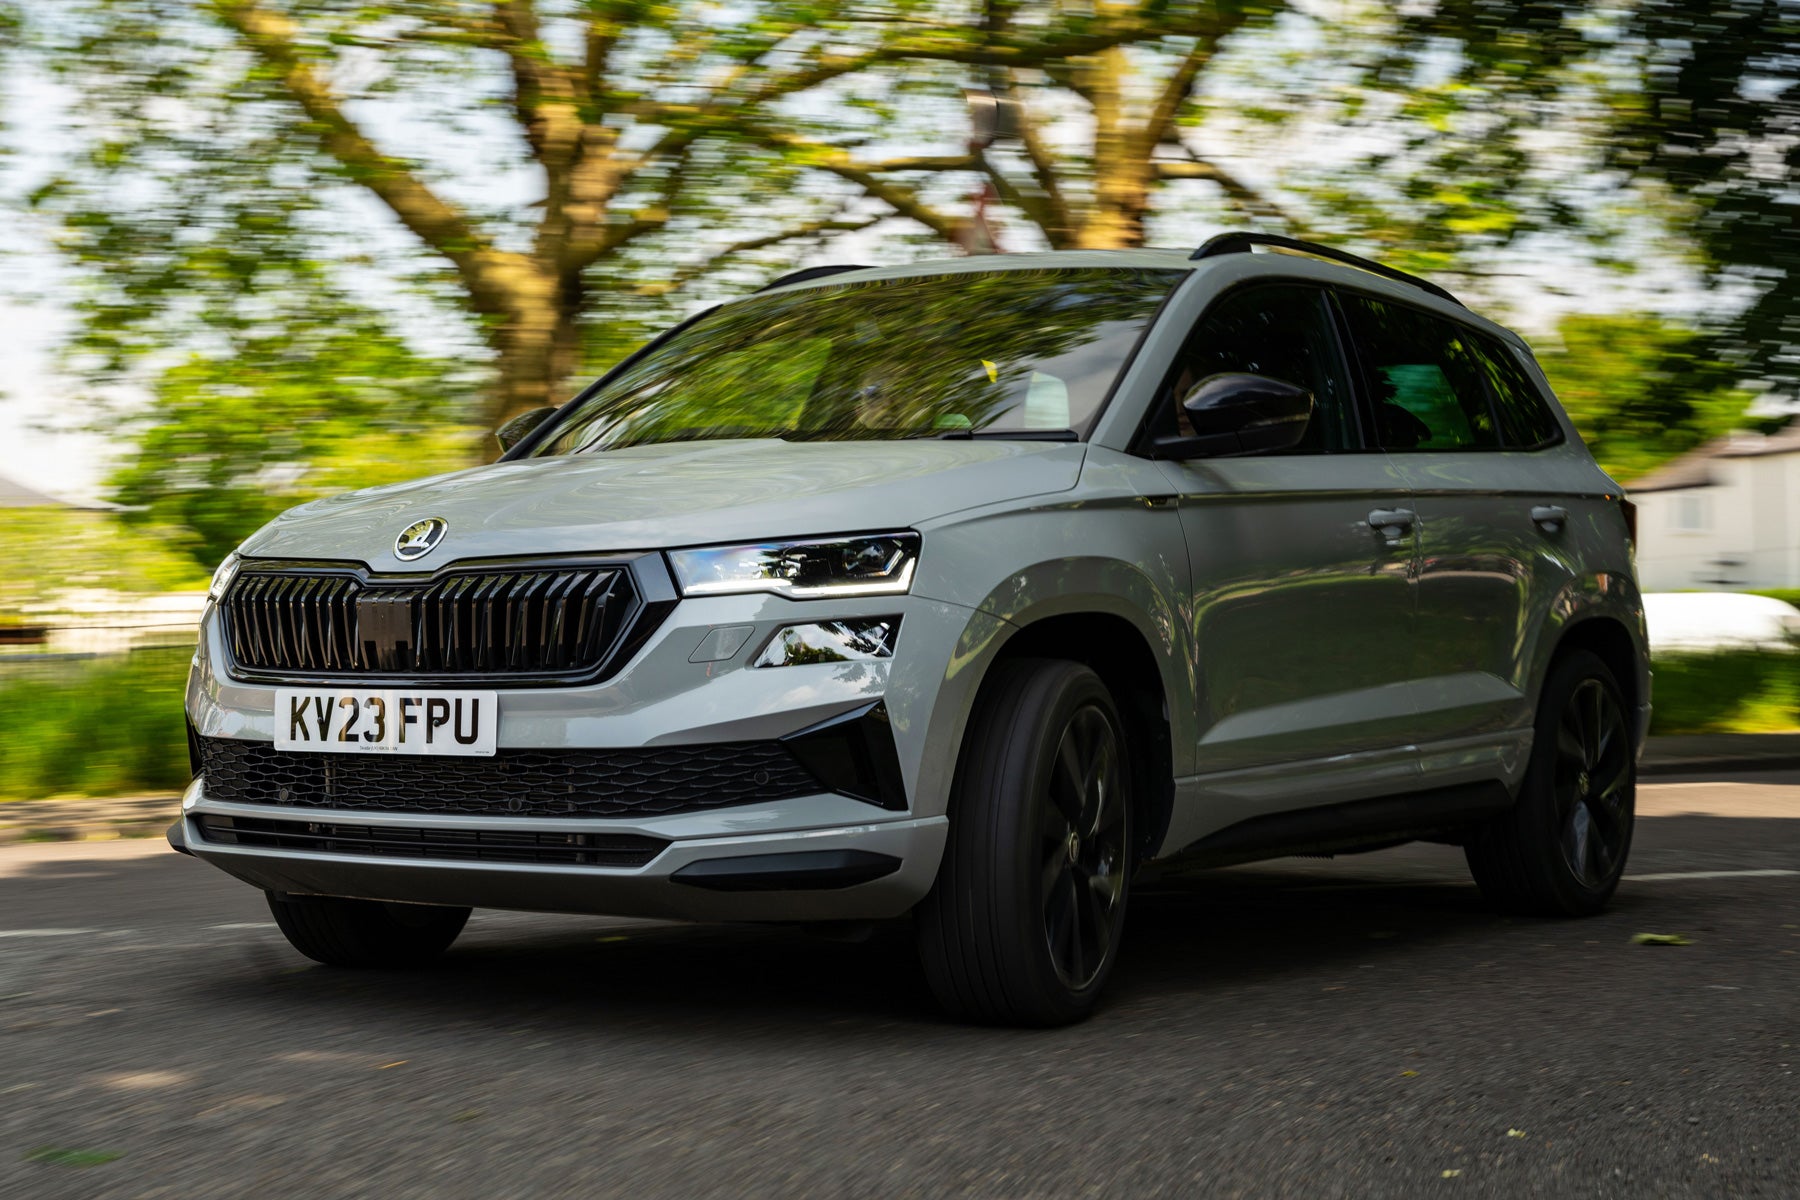 This is the most powerful Skoda Karoq you can get right now